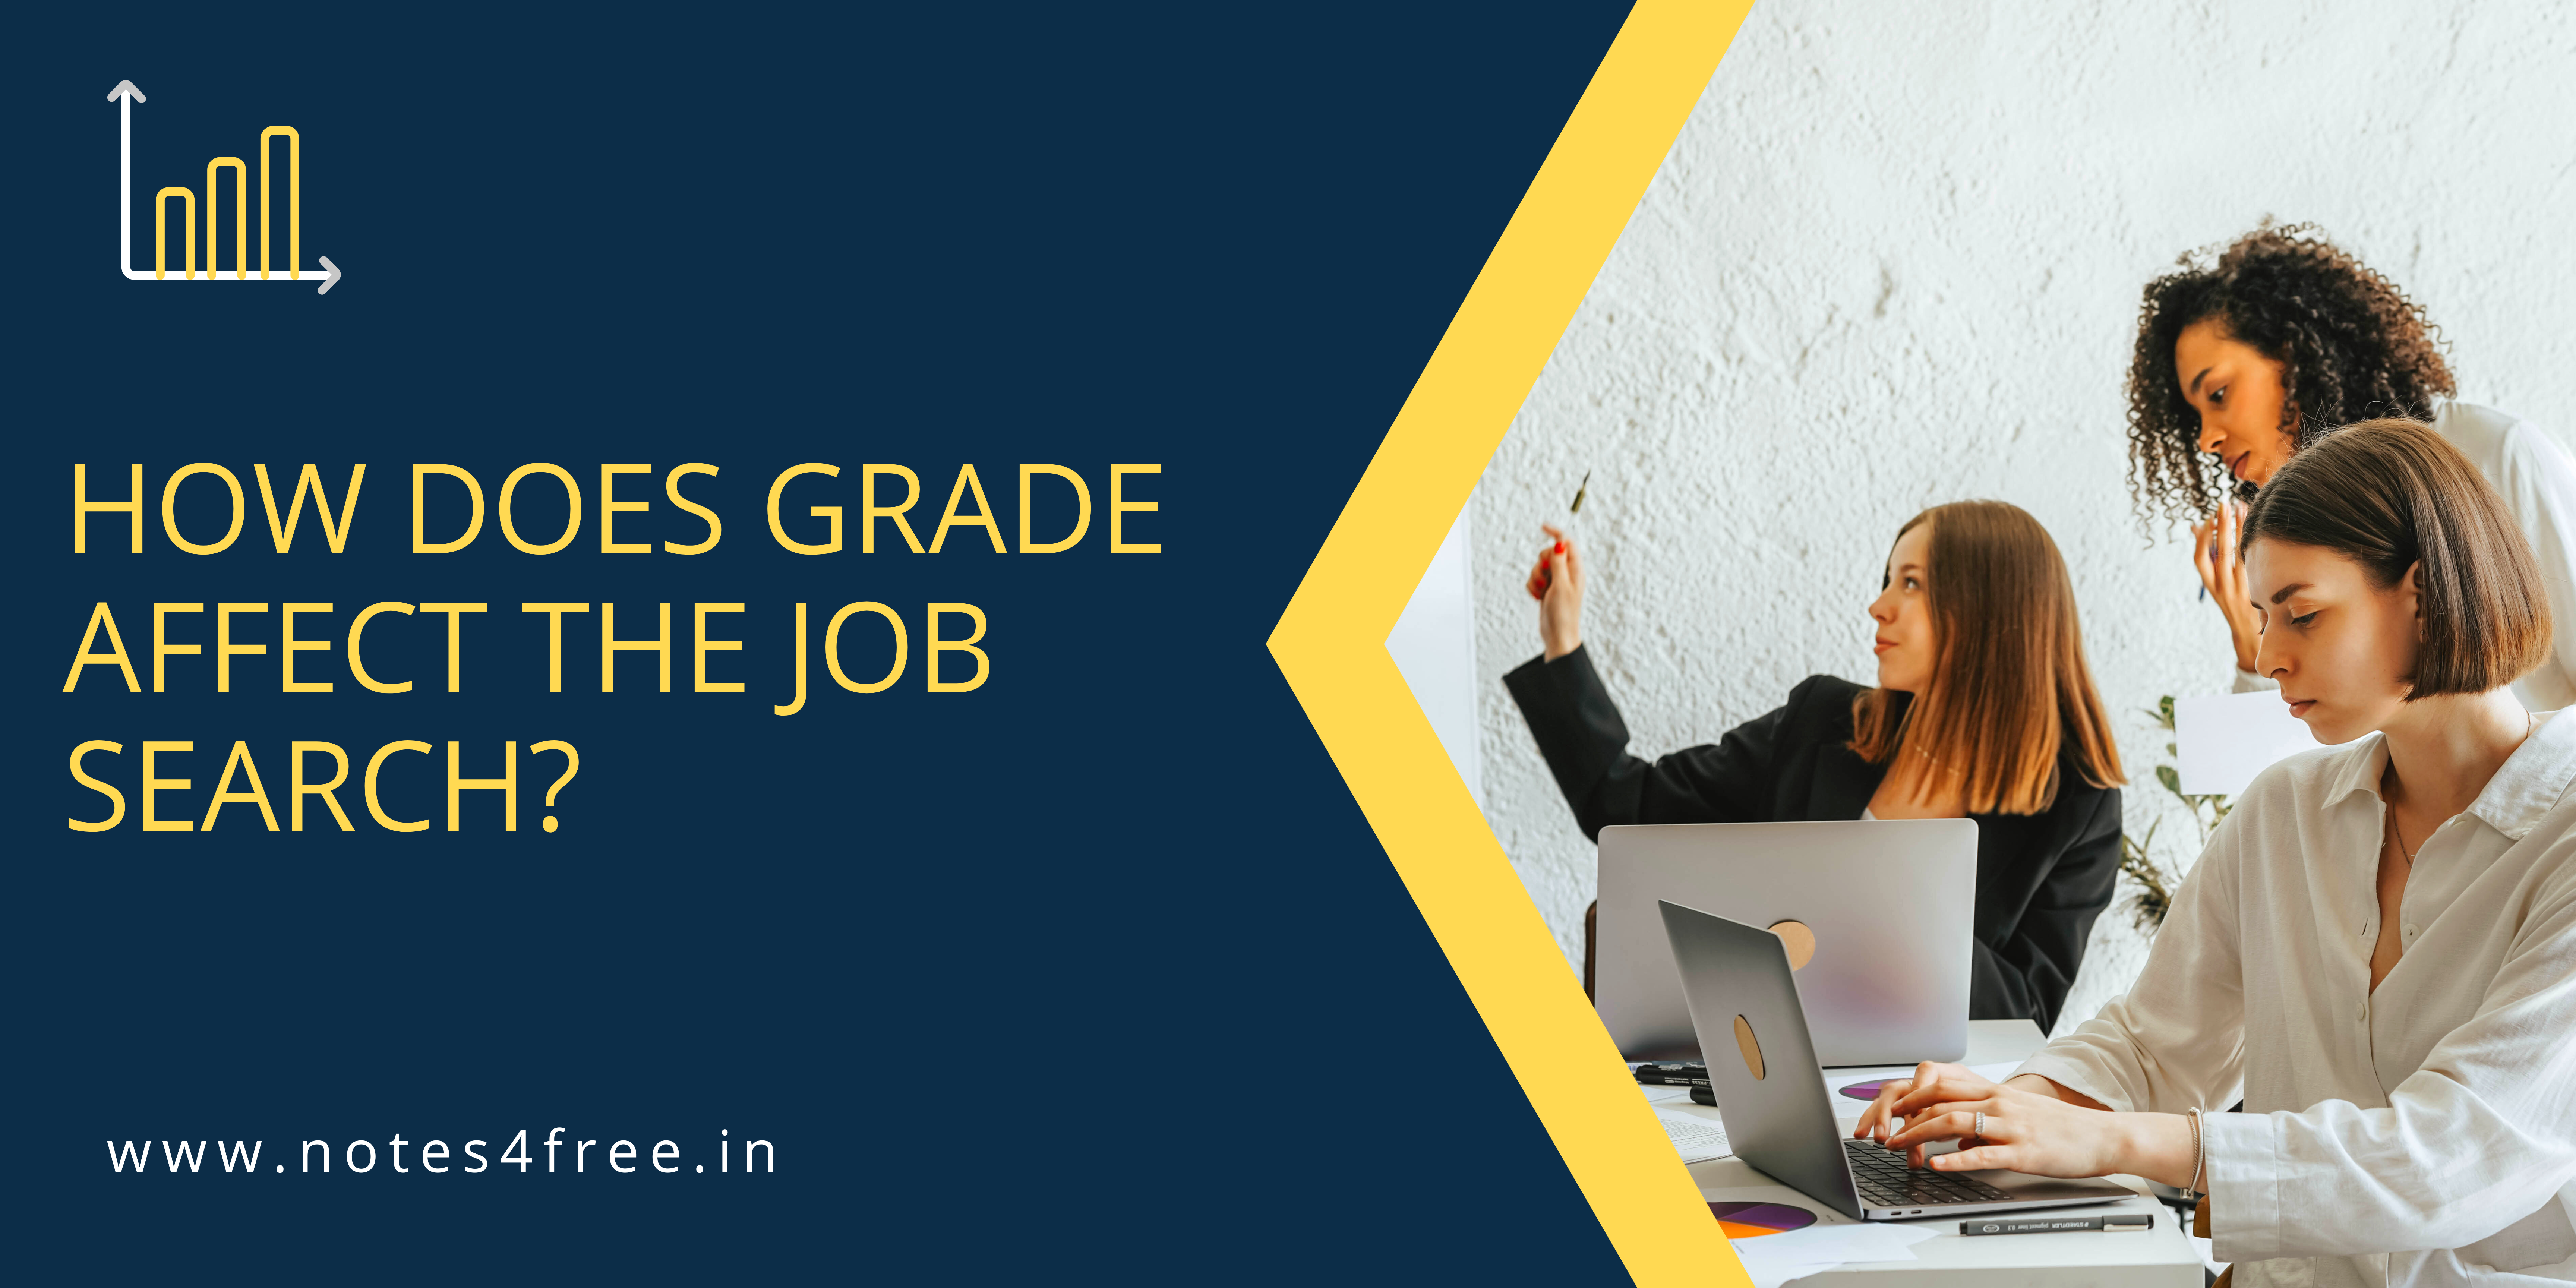 How does grade affect the job search?